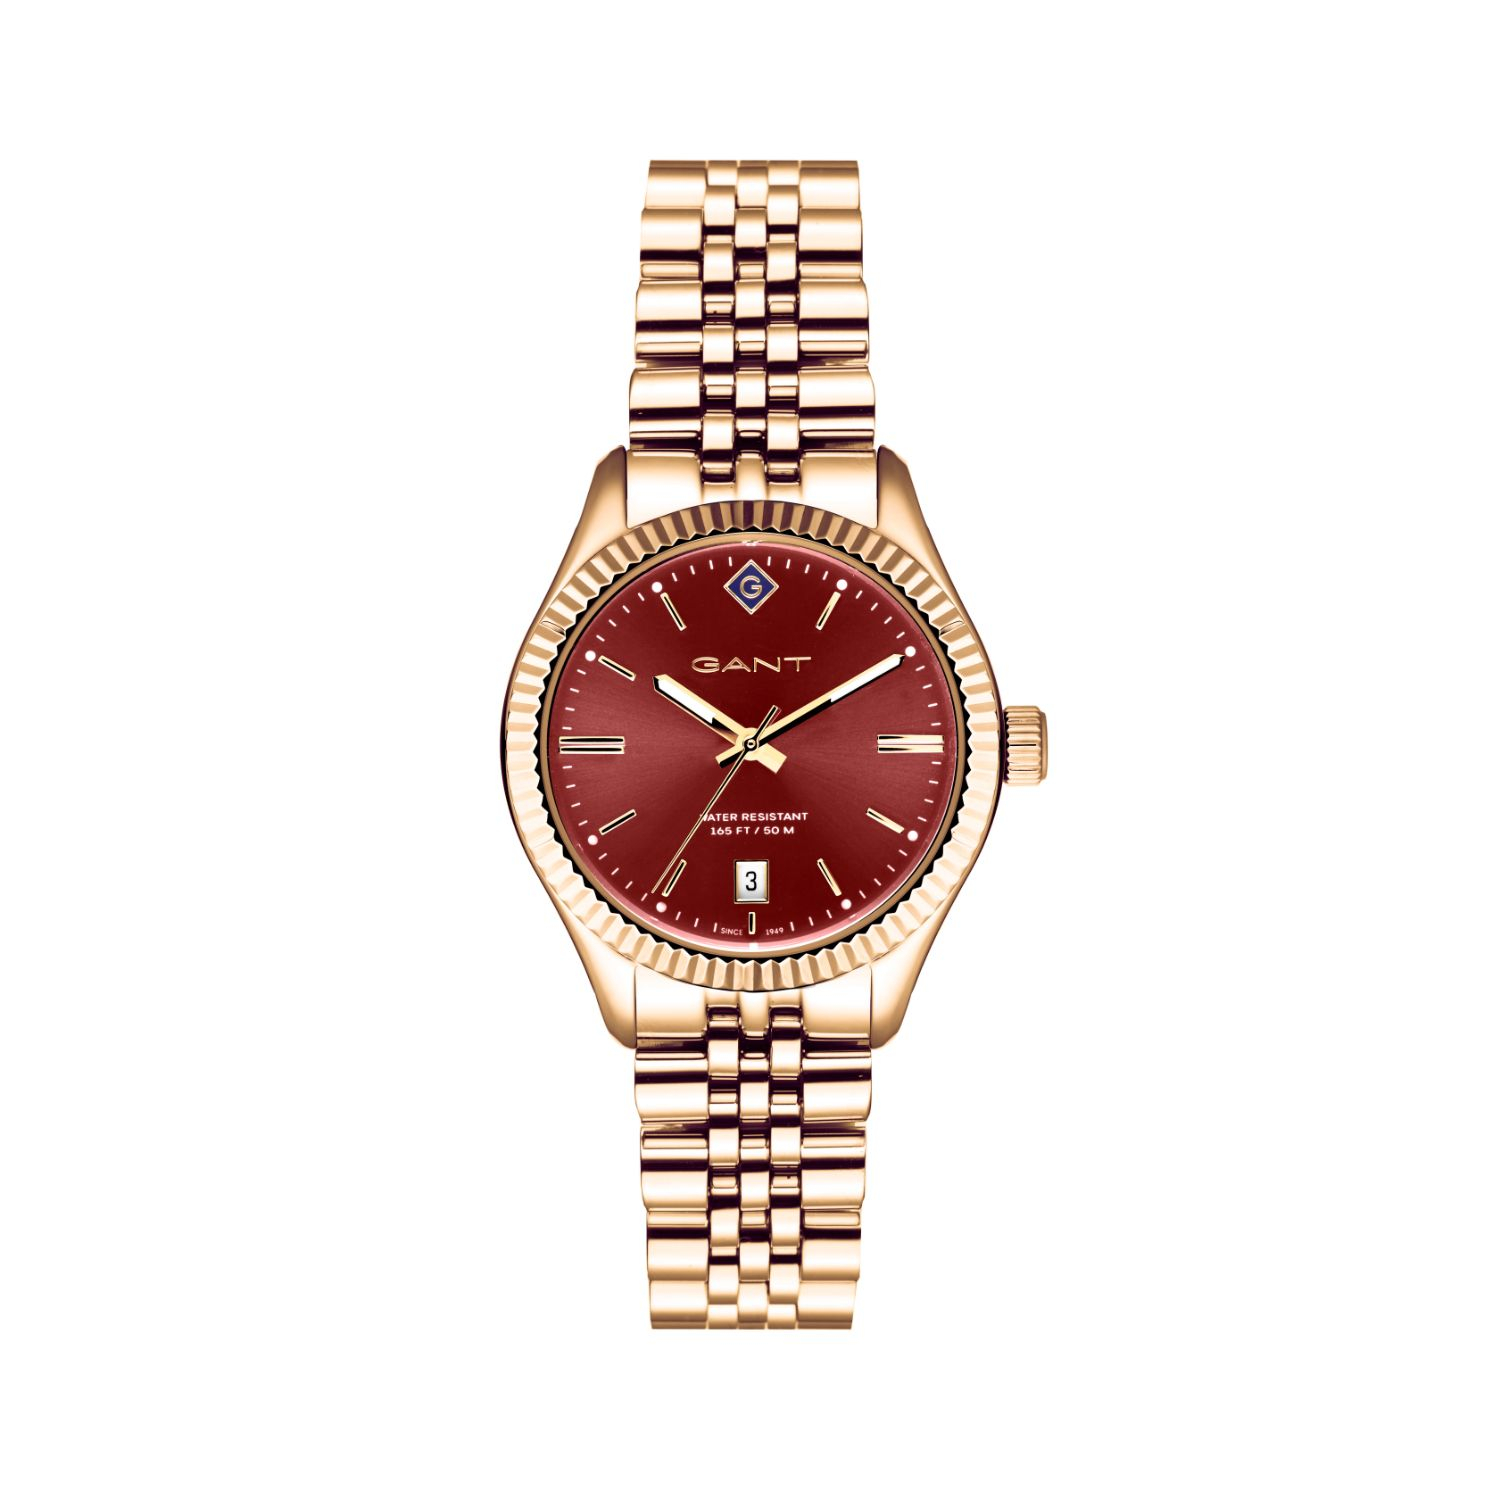 Womens Gant watch in gold stainless steel with Bordeaux dial and bracelet.